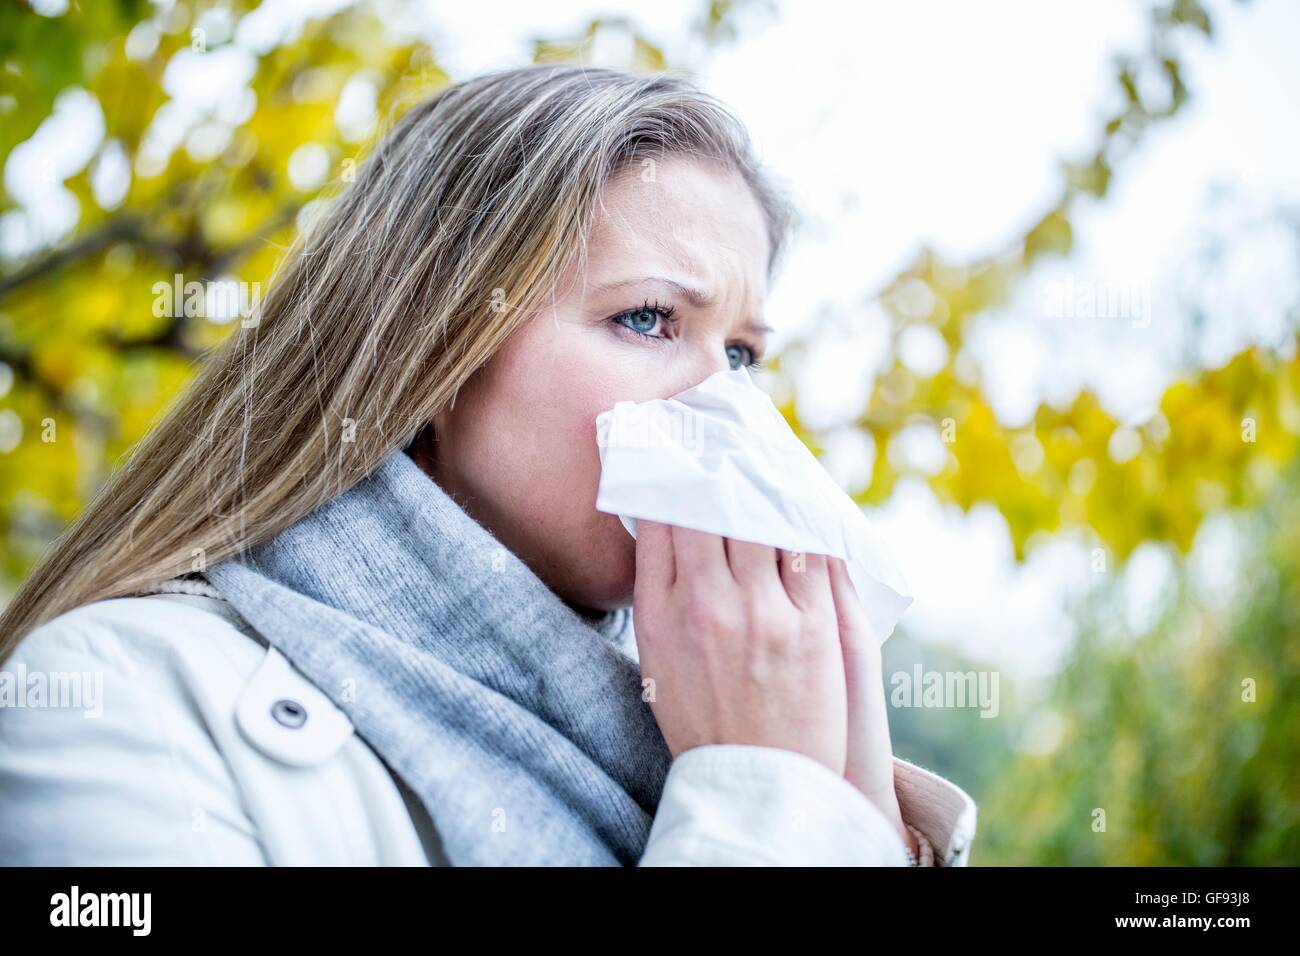 MODEL RELEASED. Young woman sneezing, close-up. Stock Photo